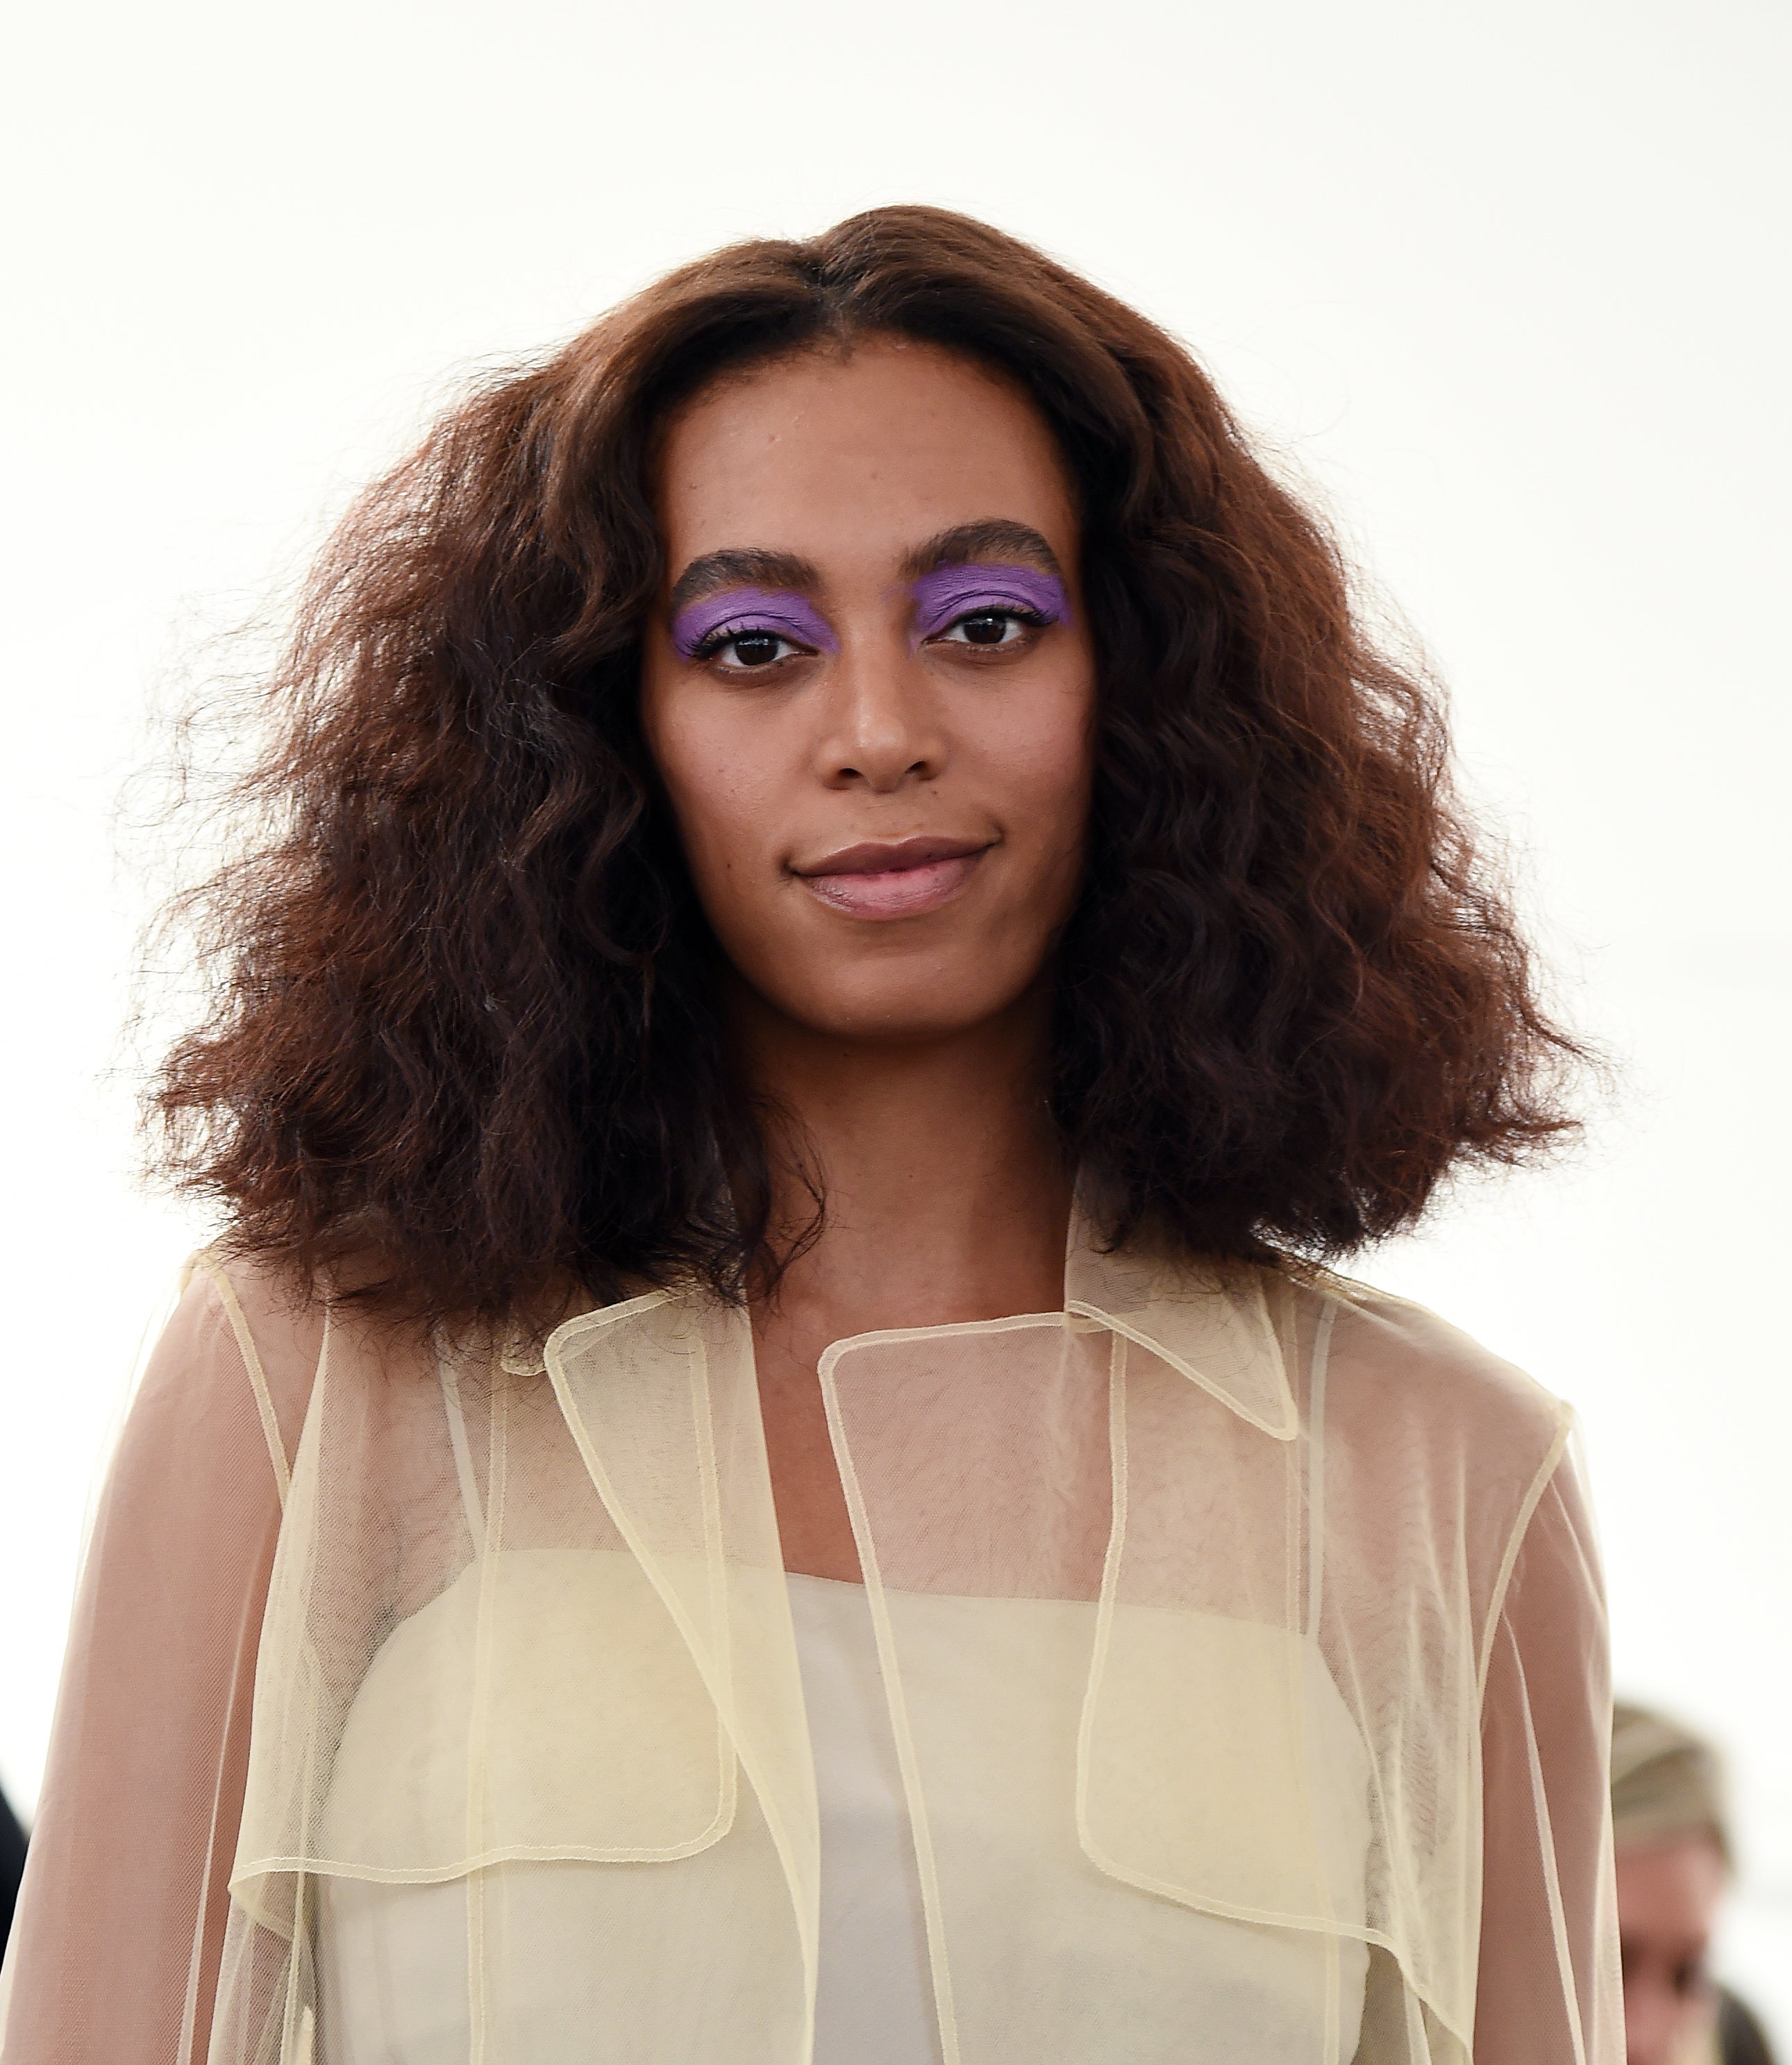 Solange Recalls Troubling Conversation Between Two White Men That Inspired ‘A Seat At The Table’